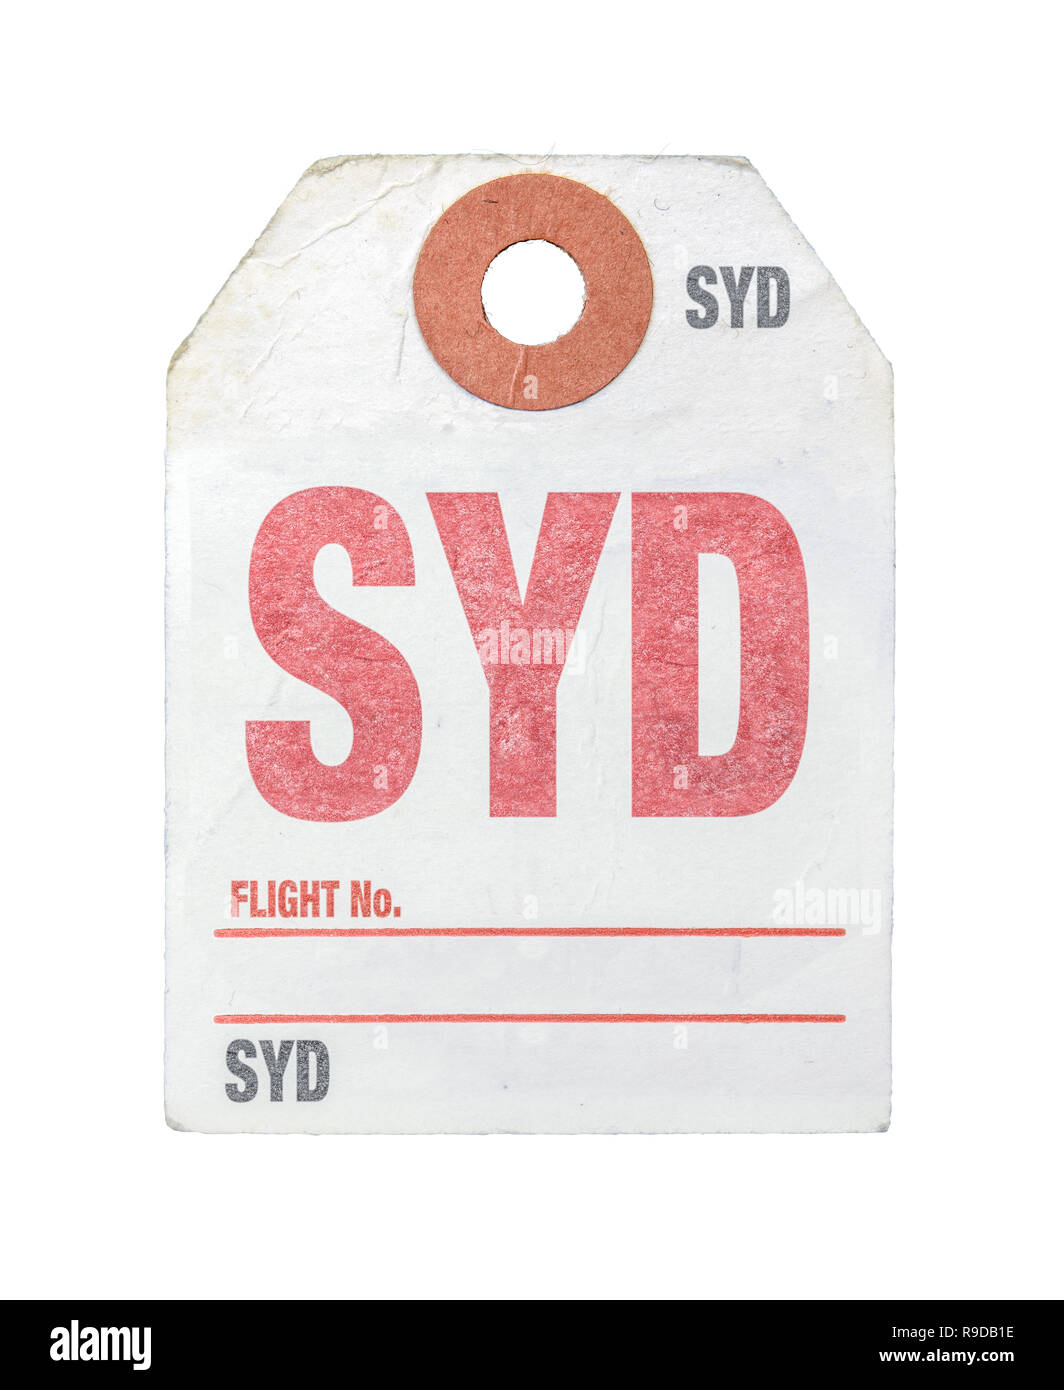 Vintage Retro Sydney Airport Luggage Label Or Tag On A White Background Stock Photo